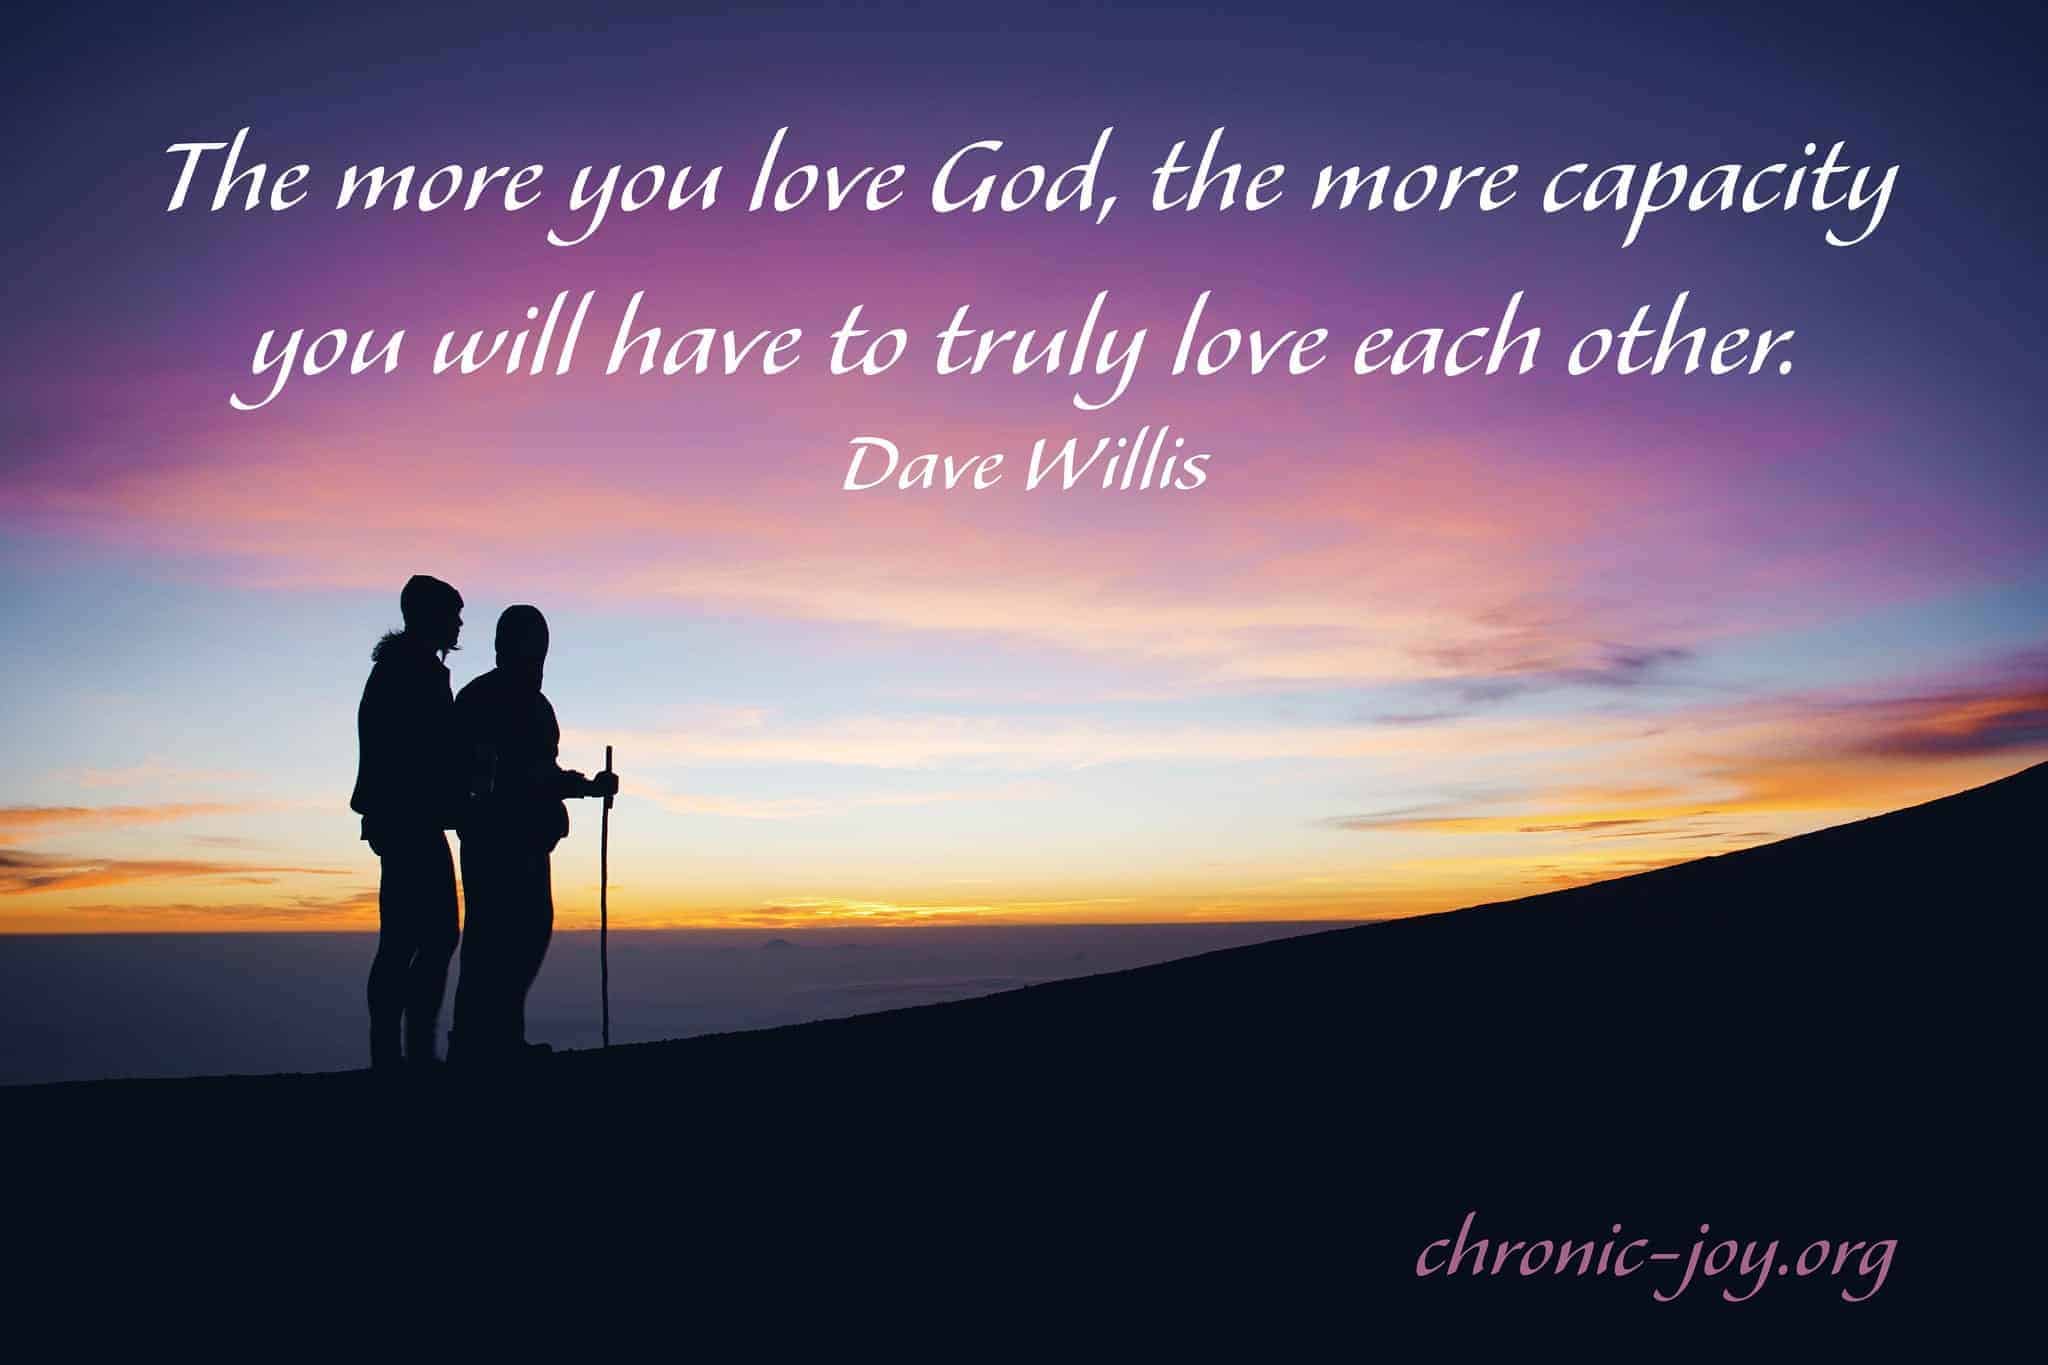 "The more you love God, the more capacity you will have to truly love each other." Dave Willis